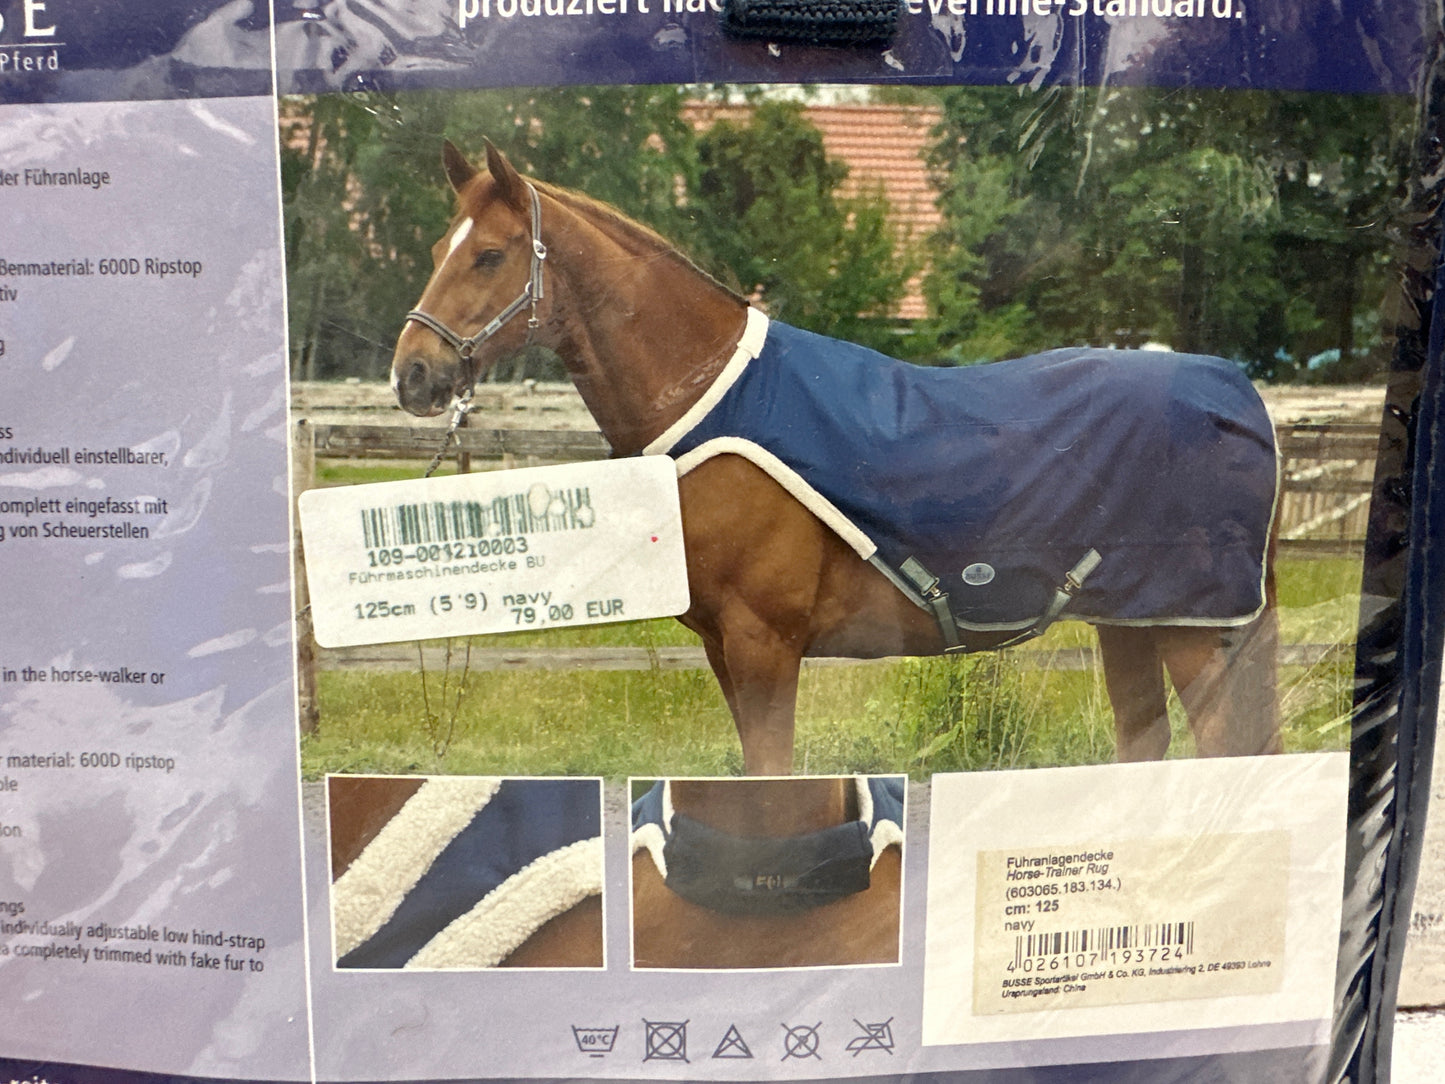 Busse Horse-Trainer Rug Navy S (125 cm) NEW